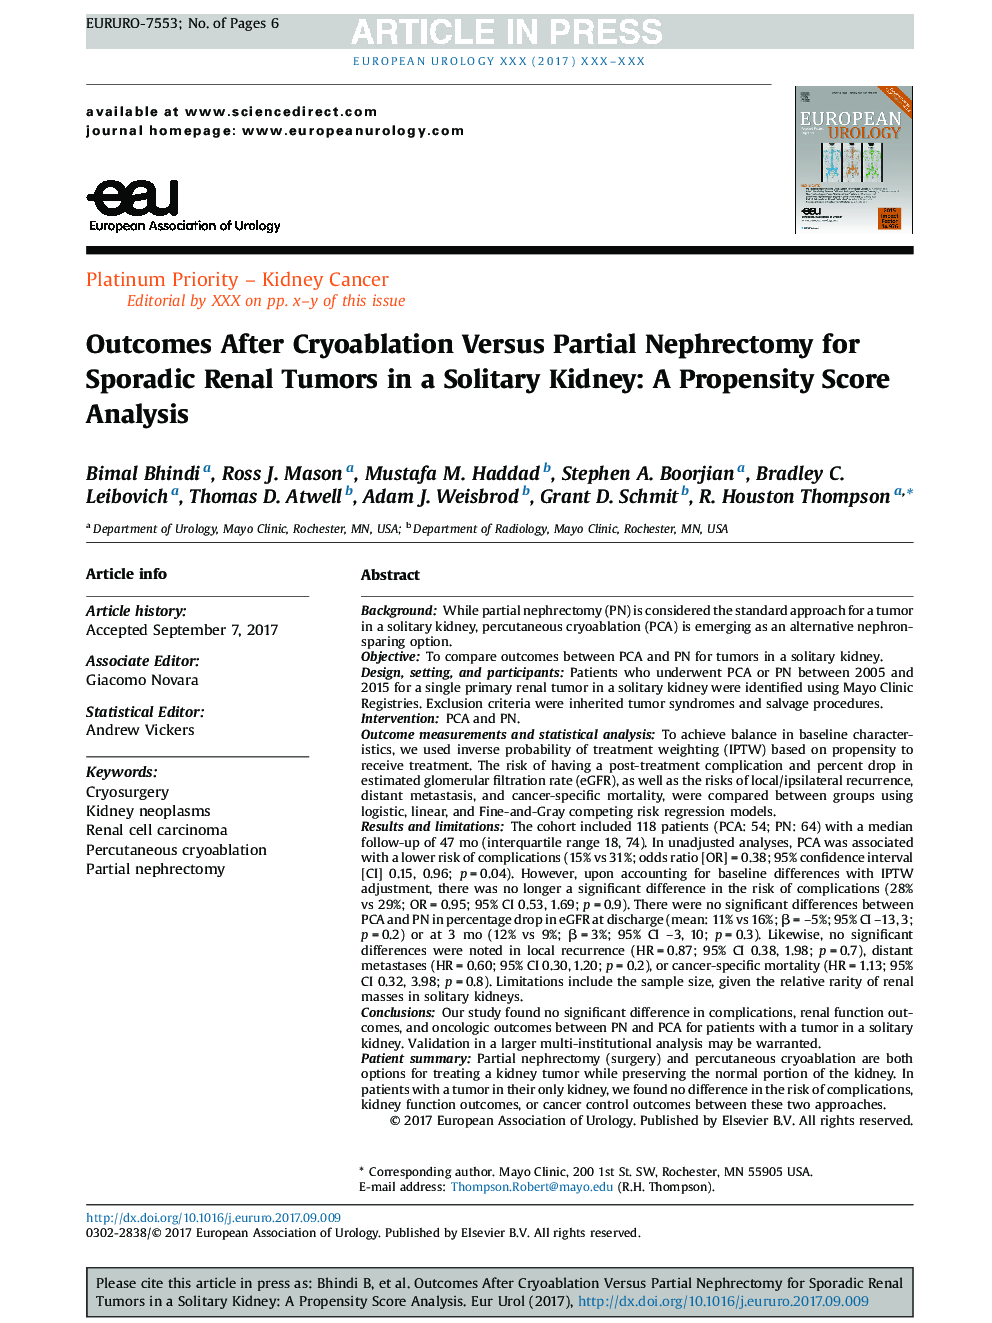 Outcomes After Cryoablation Versus Partial Nephrectomy for Sporadic Renal Tumors in a Solitary Kidney: A Propensity Score Analysis